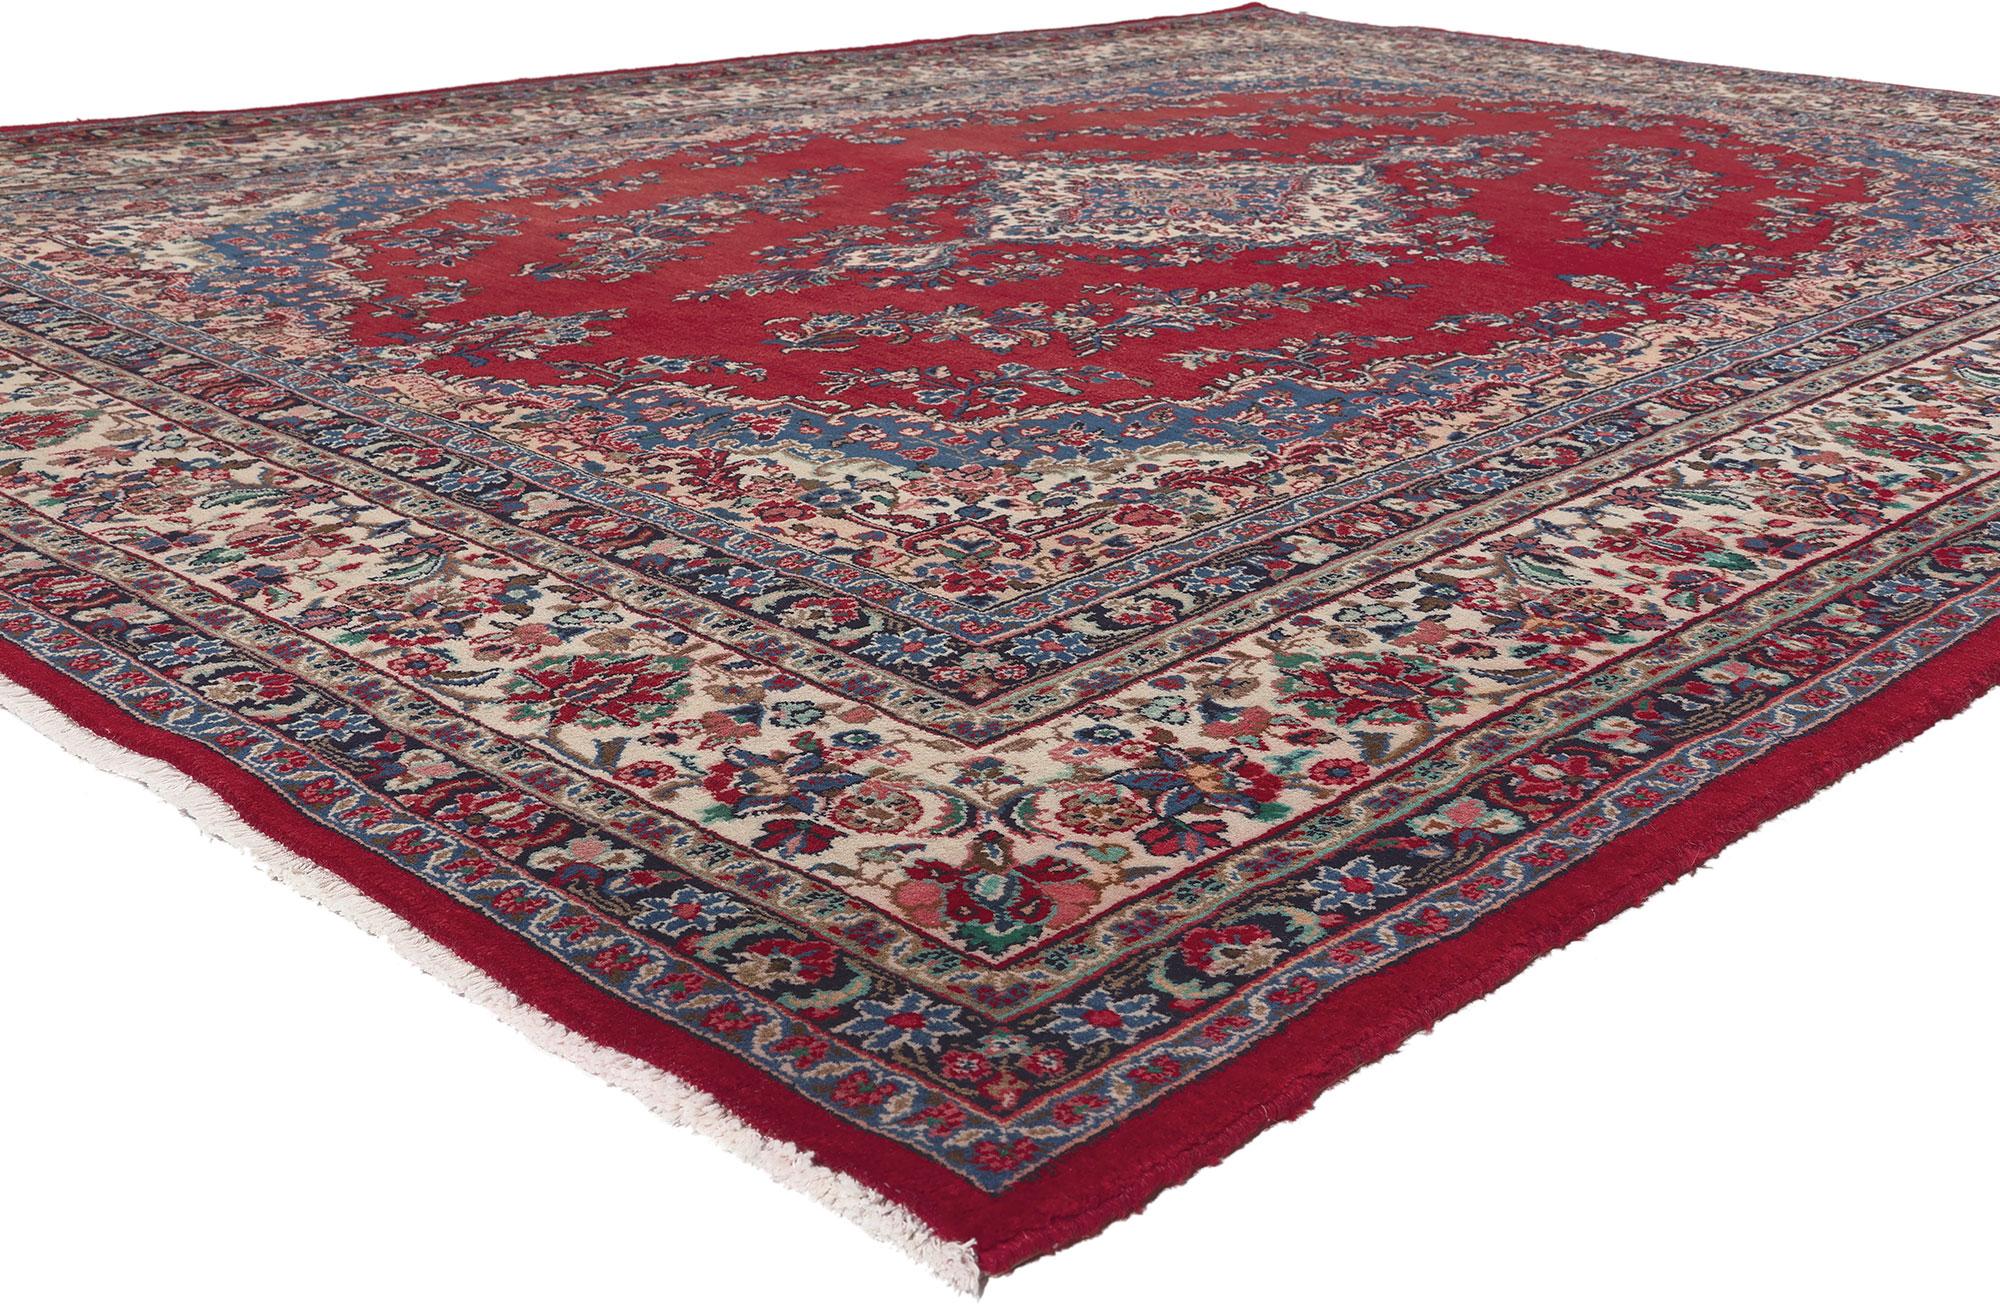 74988 Vintage Persian Hamadan Rug, 09'02 x 12'02.
Stately decadence meets luxurious Jacobean style in this vintage Persian Hamadan rug. The ornate floral design elements and rich colors woven into this piece work together ​evoking a timeless sense